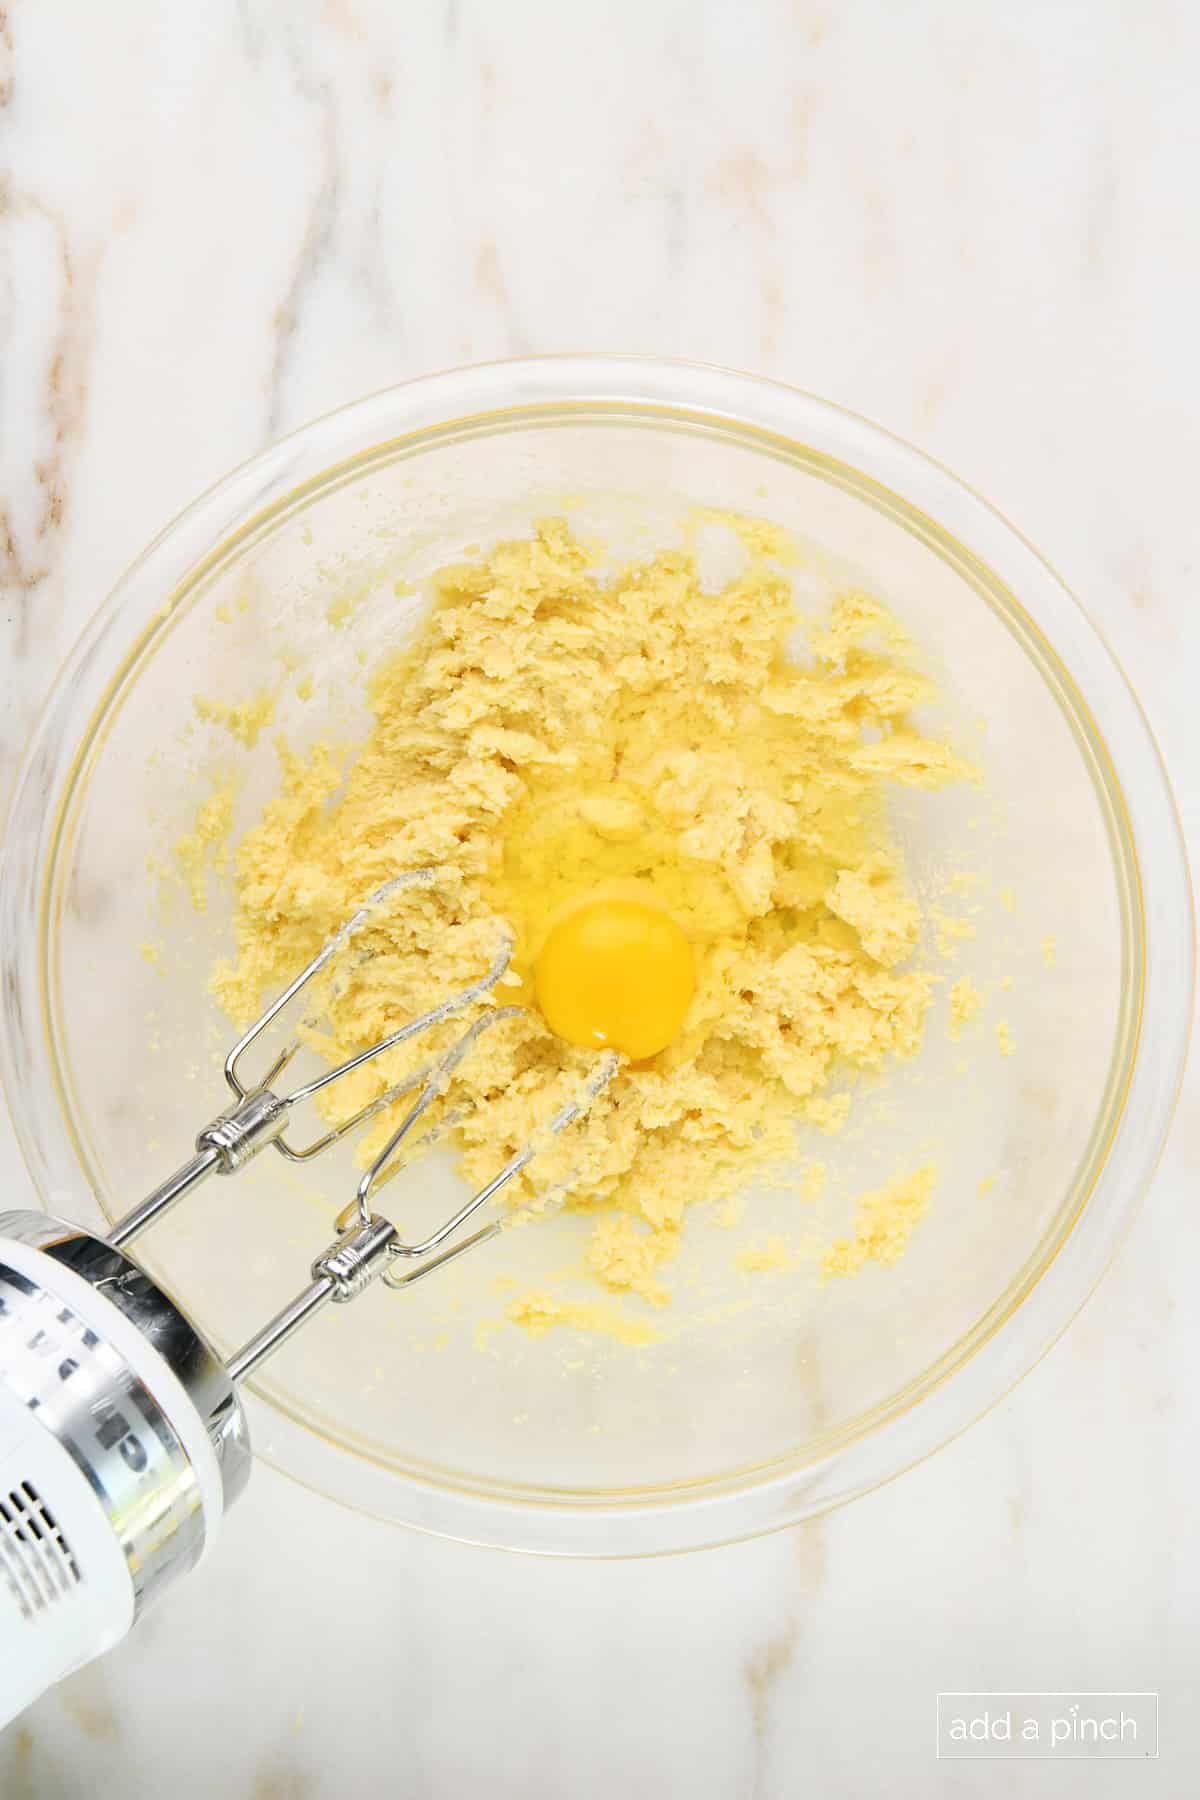 Egg added to butter mixture in glass mixing bowl